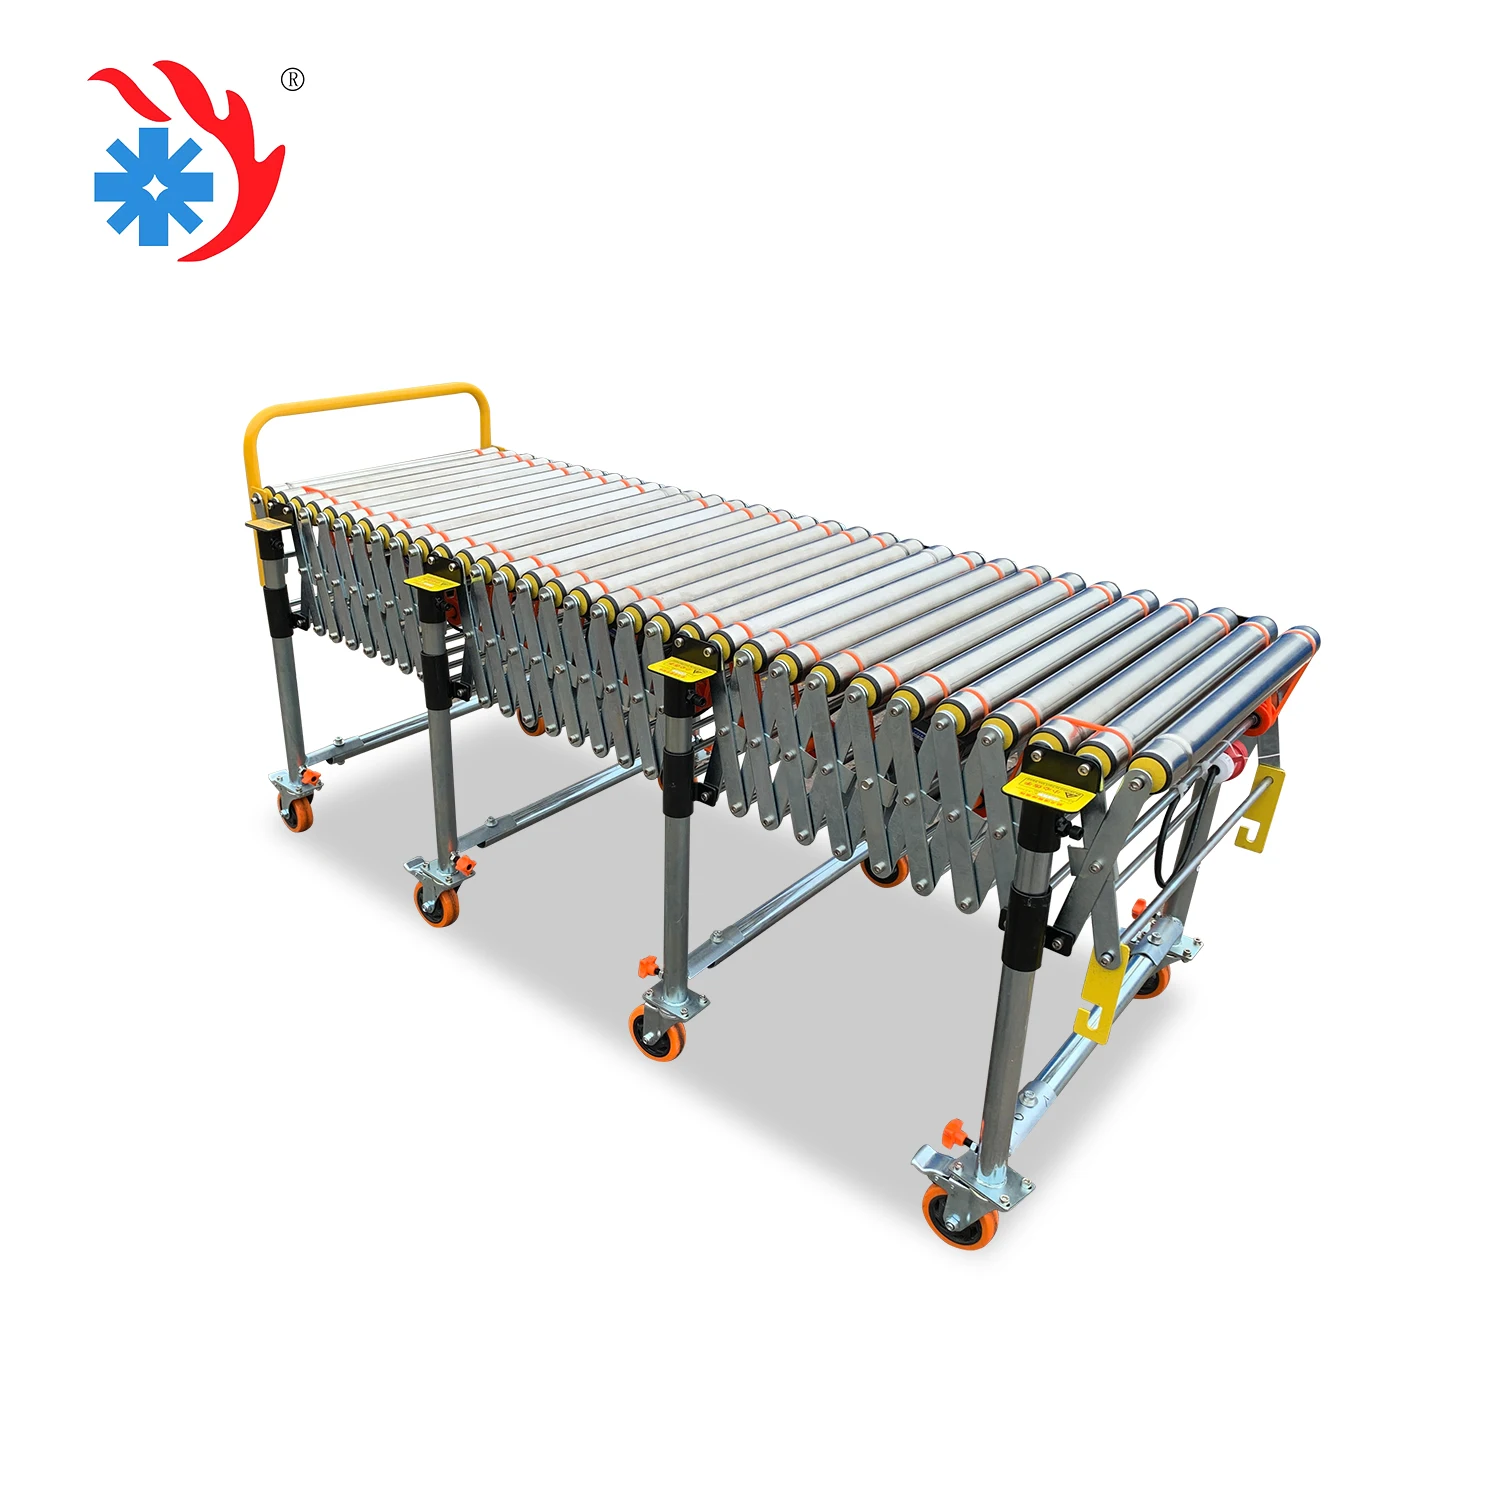 Motorized Poly Vee Belt Driven Flexible Roller Conveyor for Track Loading Product Transporting